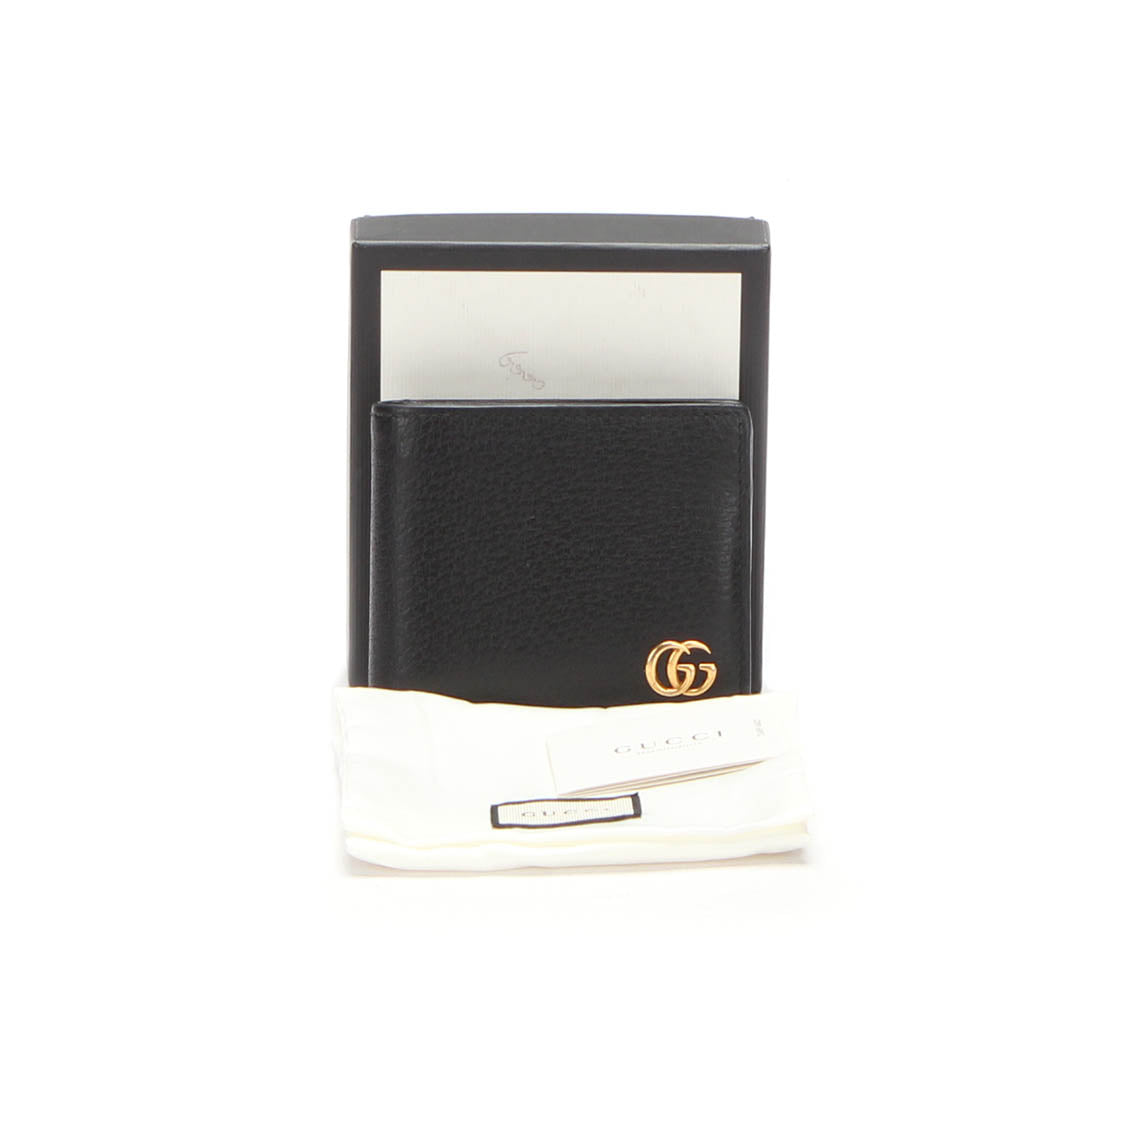 GG Marmont leather money clip